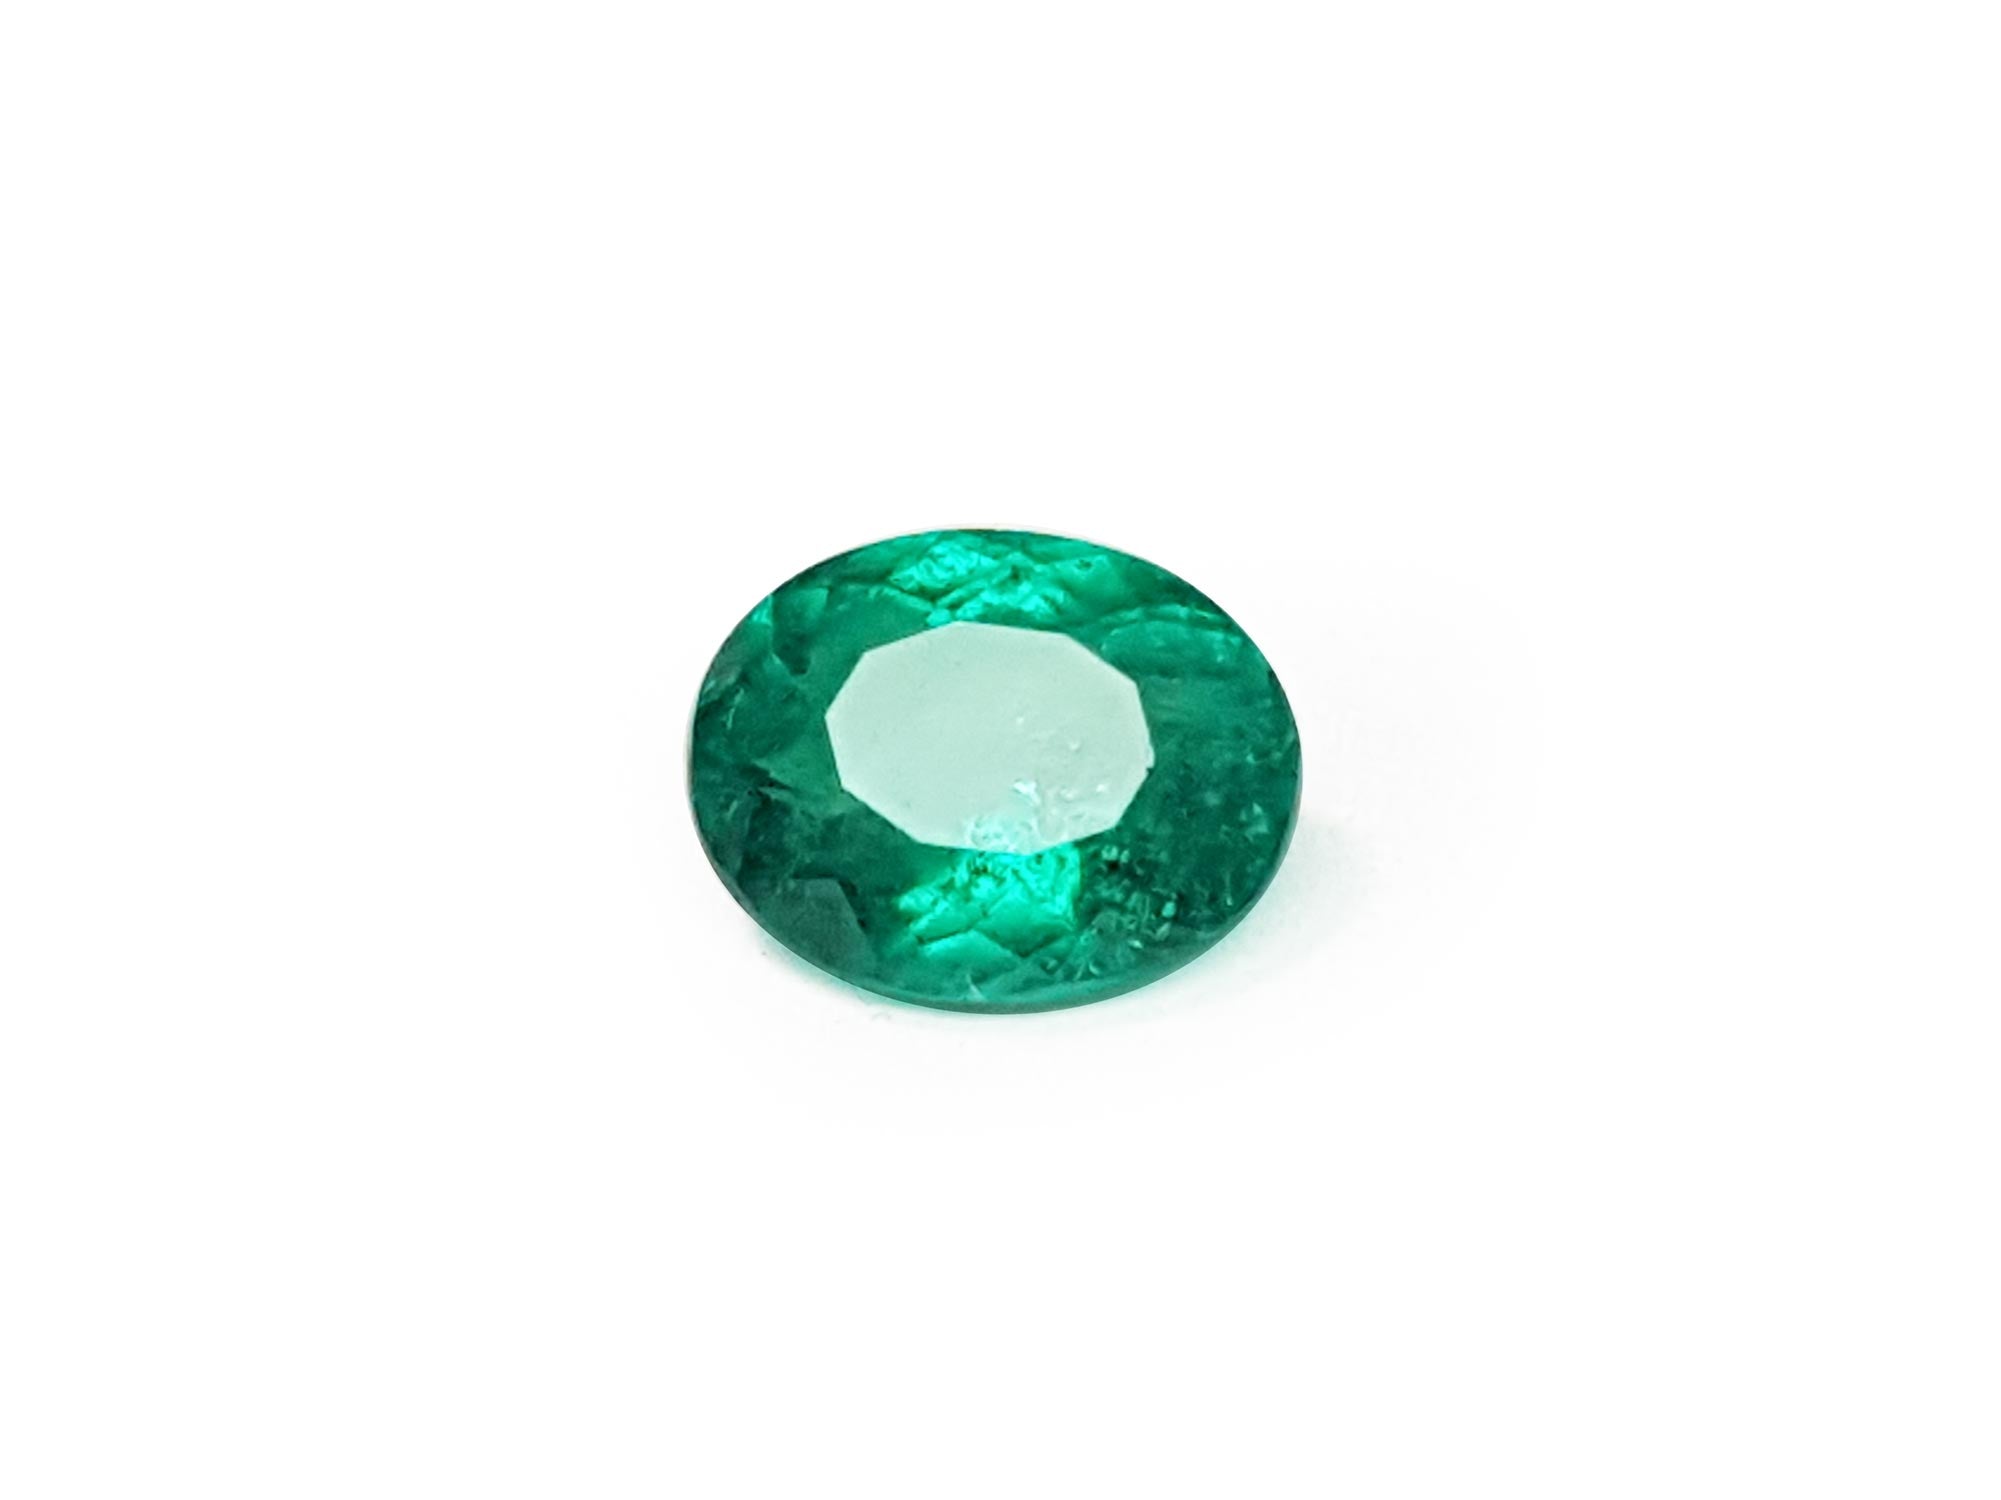 Genuine loose Colombian emerald for sale